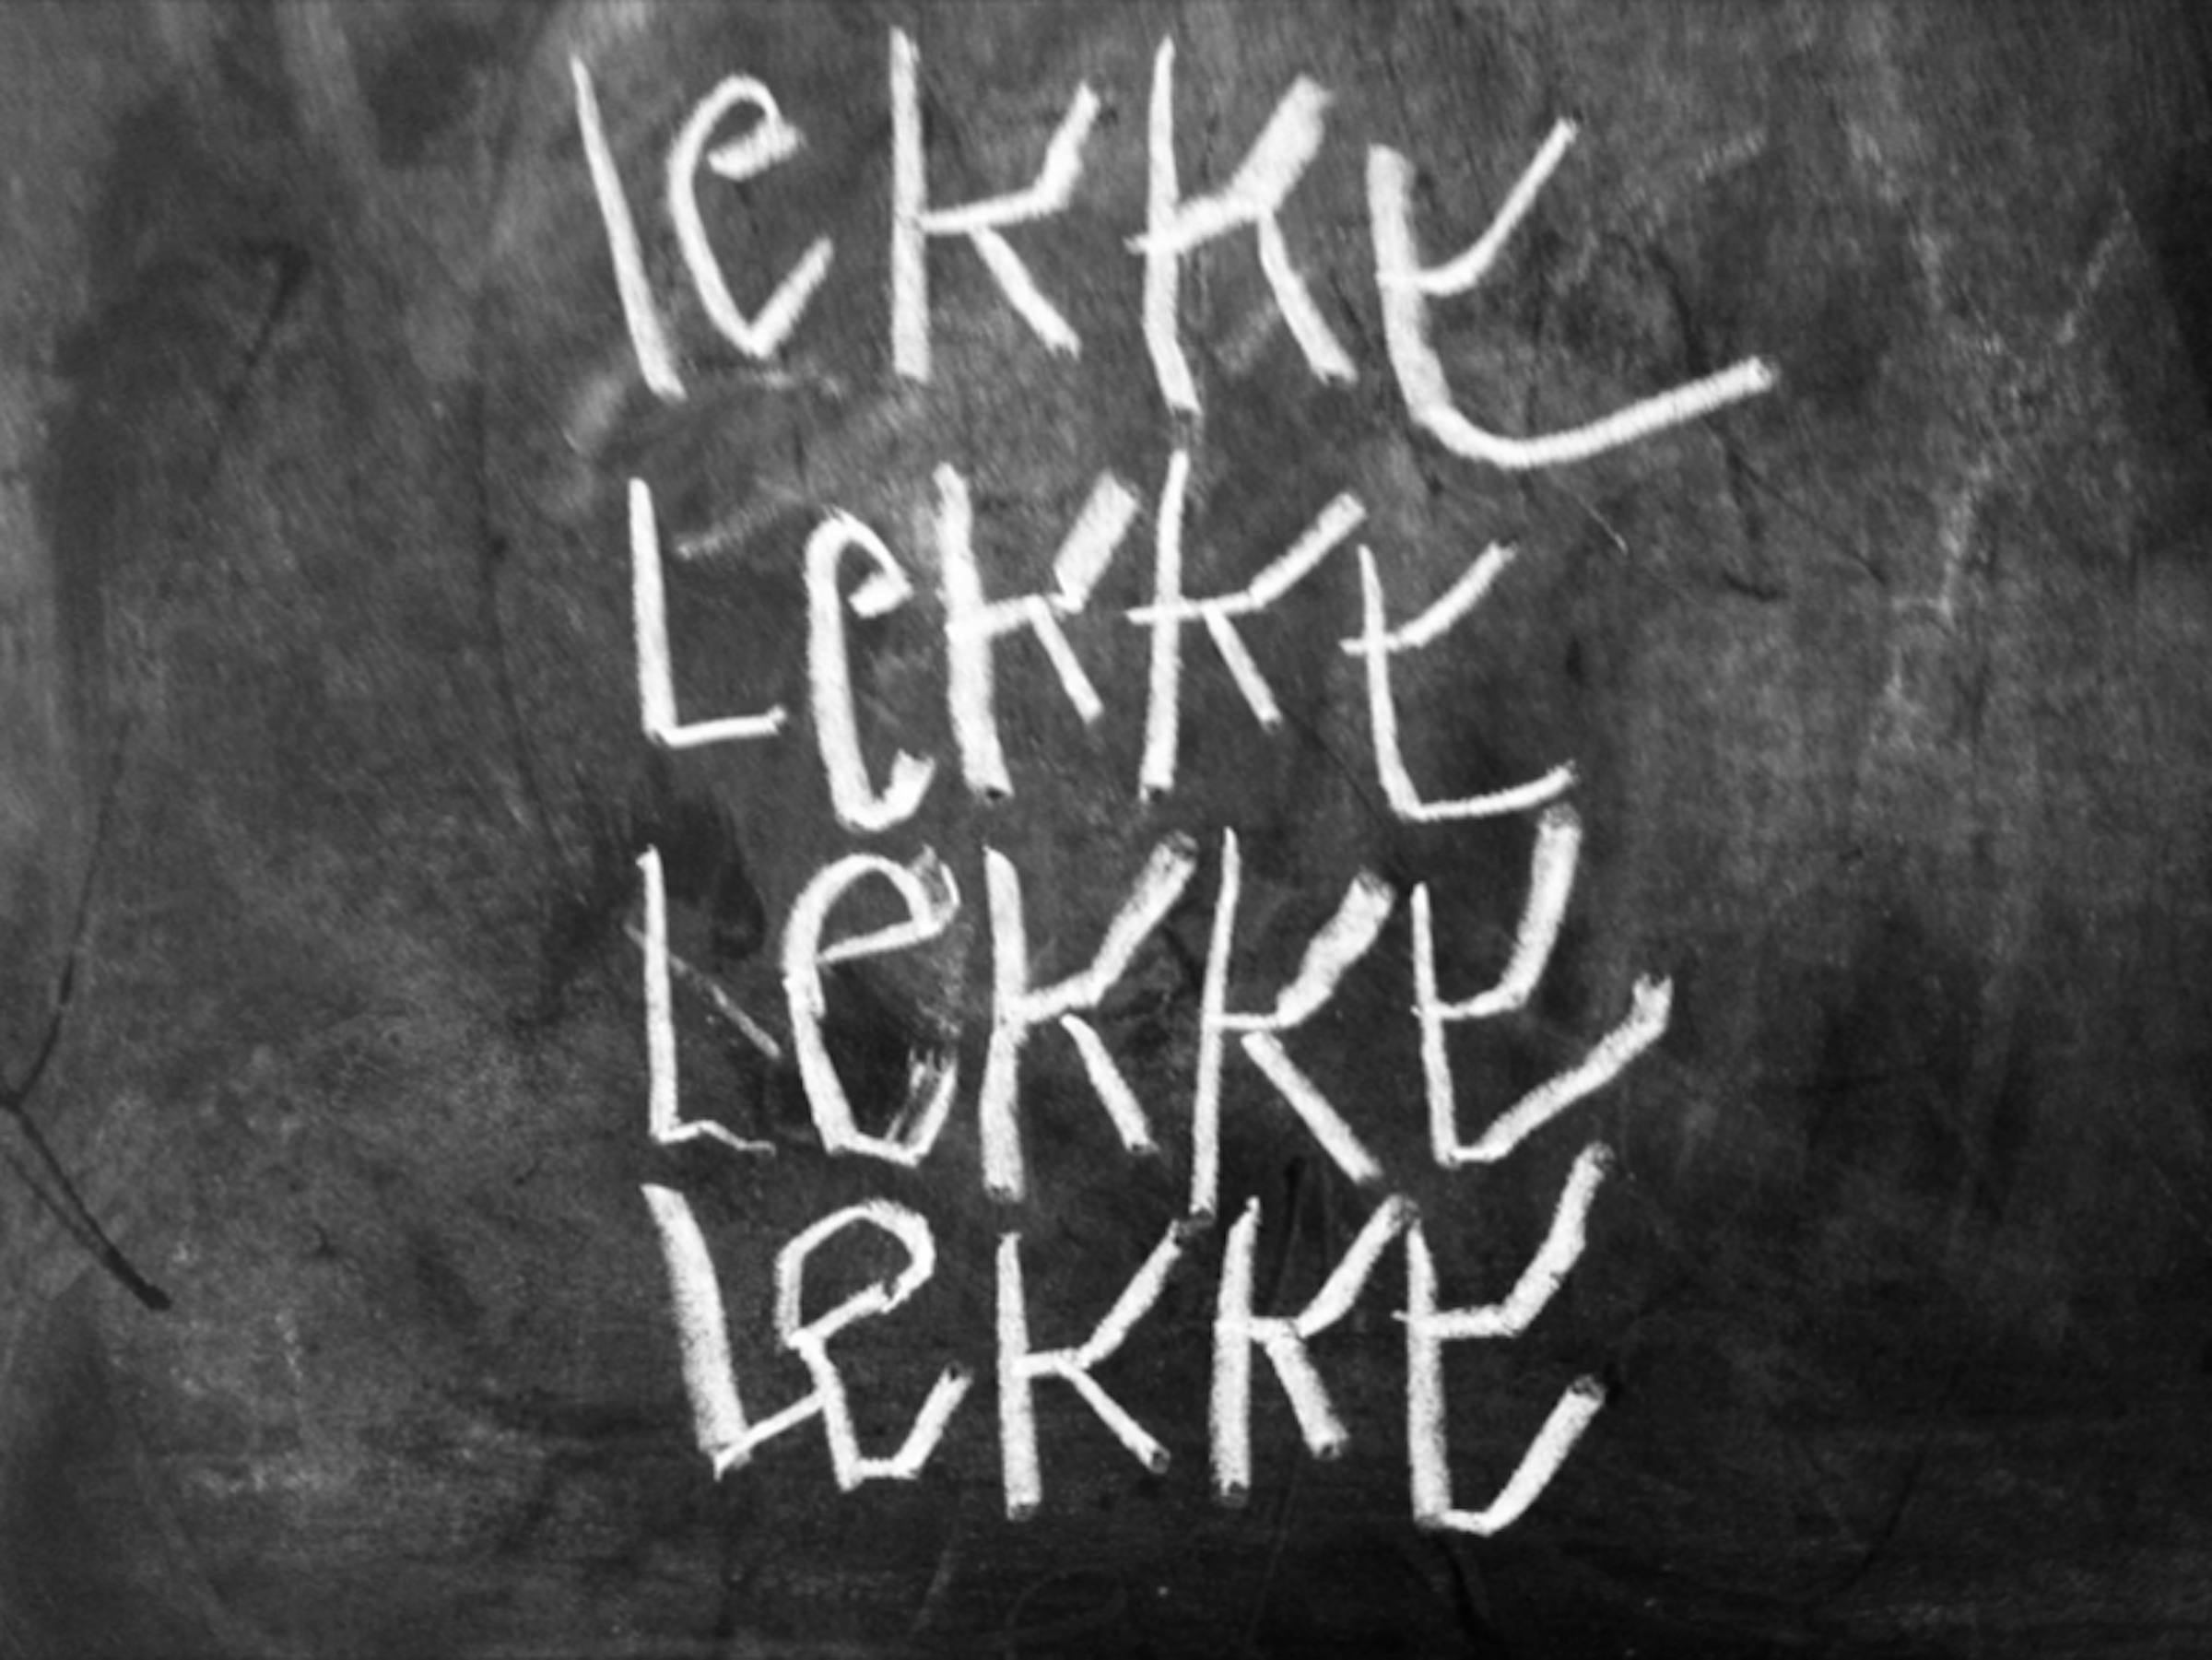 an image of the word 'lekke' written 4 times in handwriting. The words are stacked on top of each other